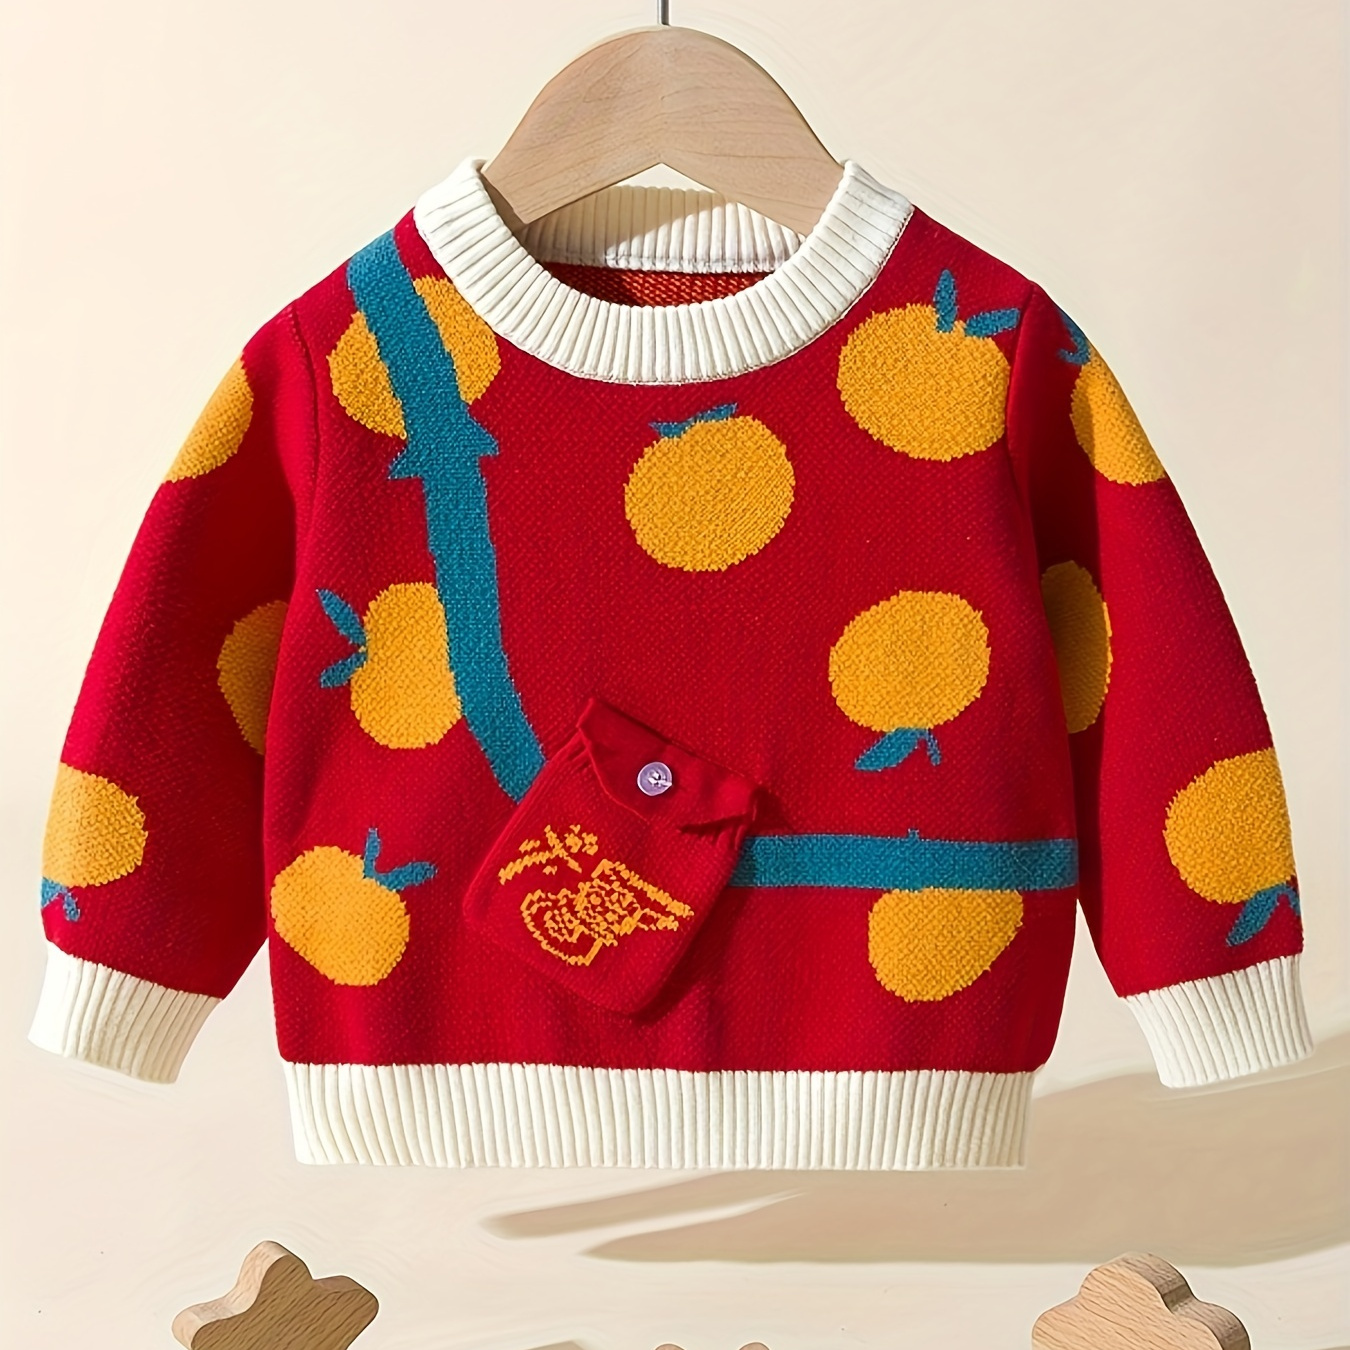 

Girls Boys Cute Graphic Knit Sweater, Toddler Baby's Cotton Pullover Bottoming Top, Cheerful New Year Street Trendy Kid's Sweater